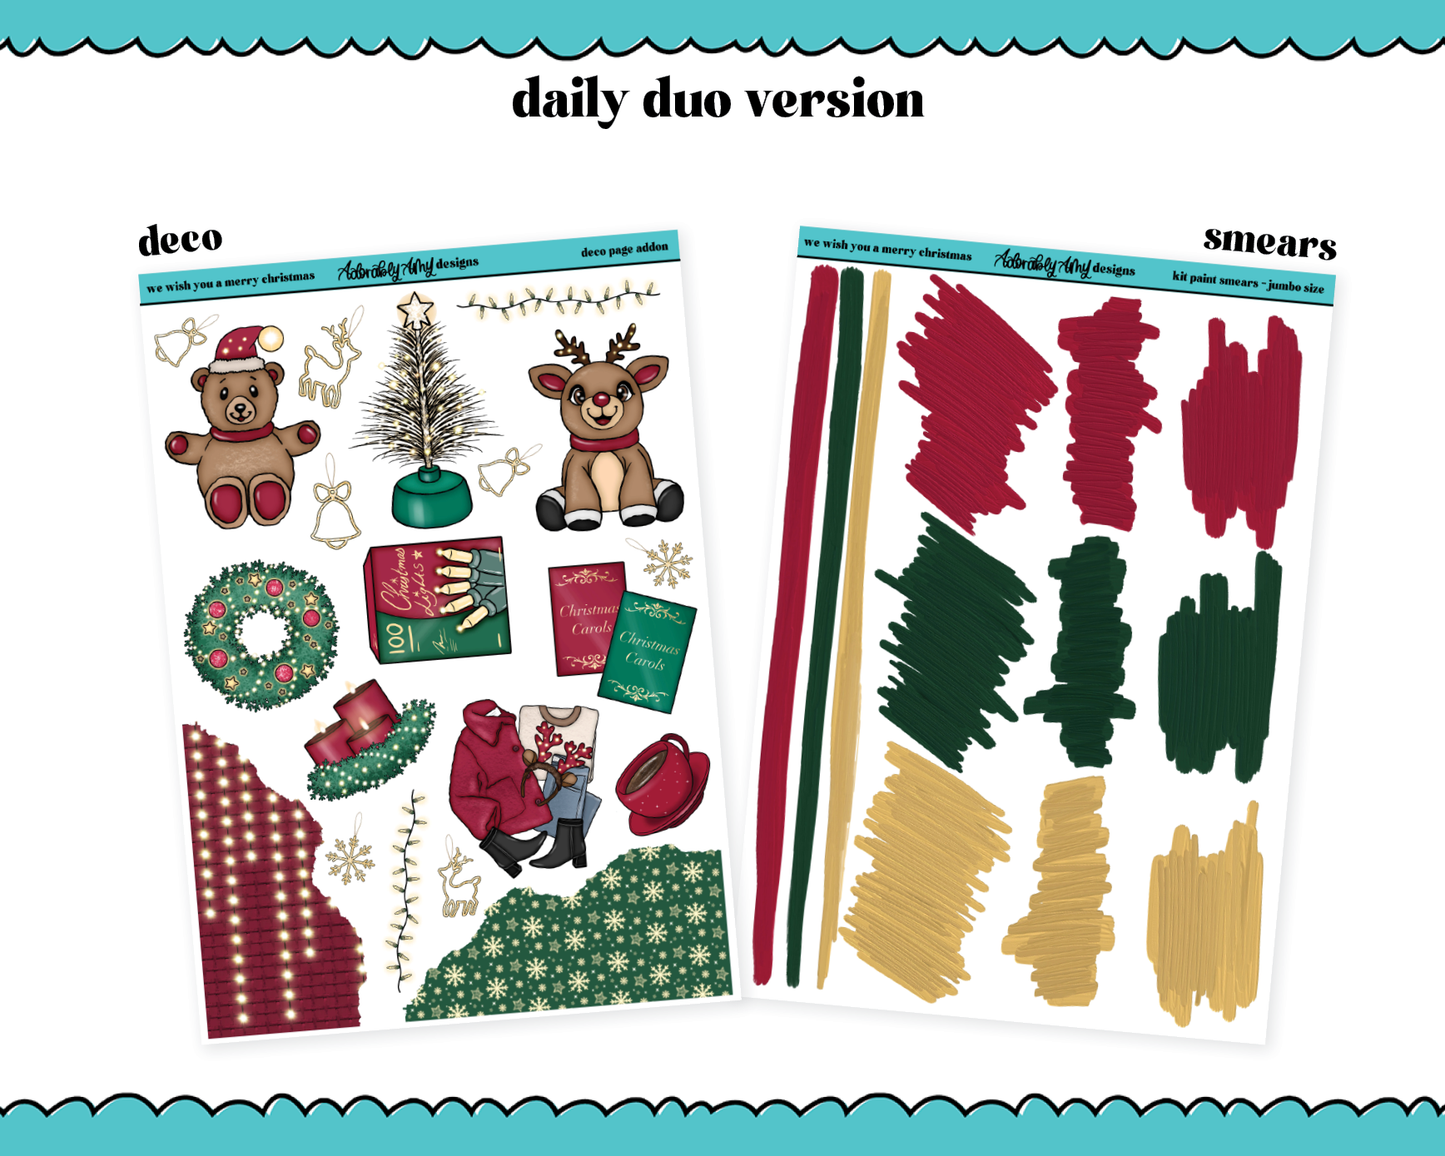 Daily Duo We Wish You a Merry Christmas Themed Weekly Planner Sticker Kit for Daily Duo Planner